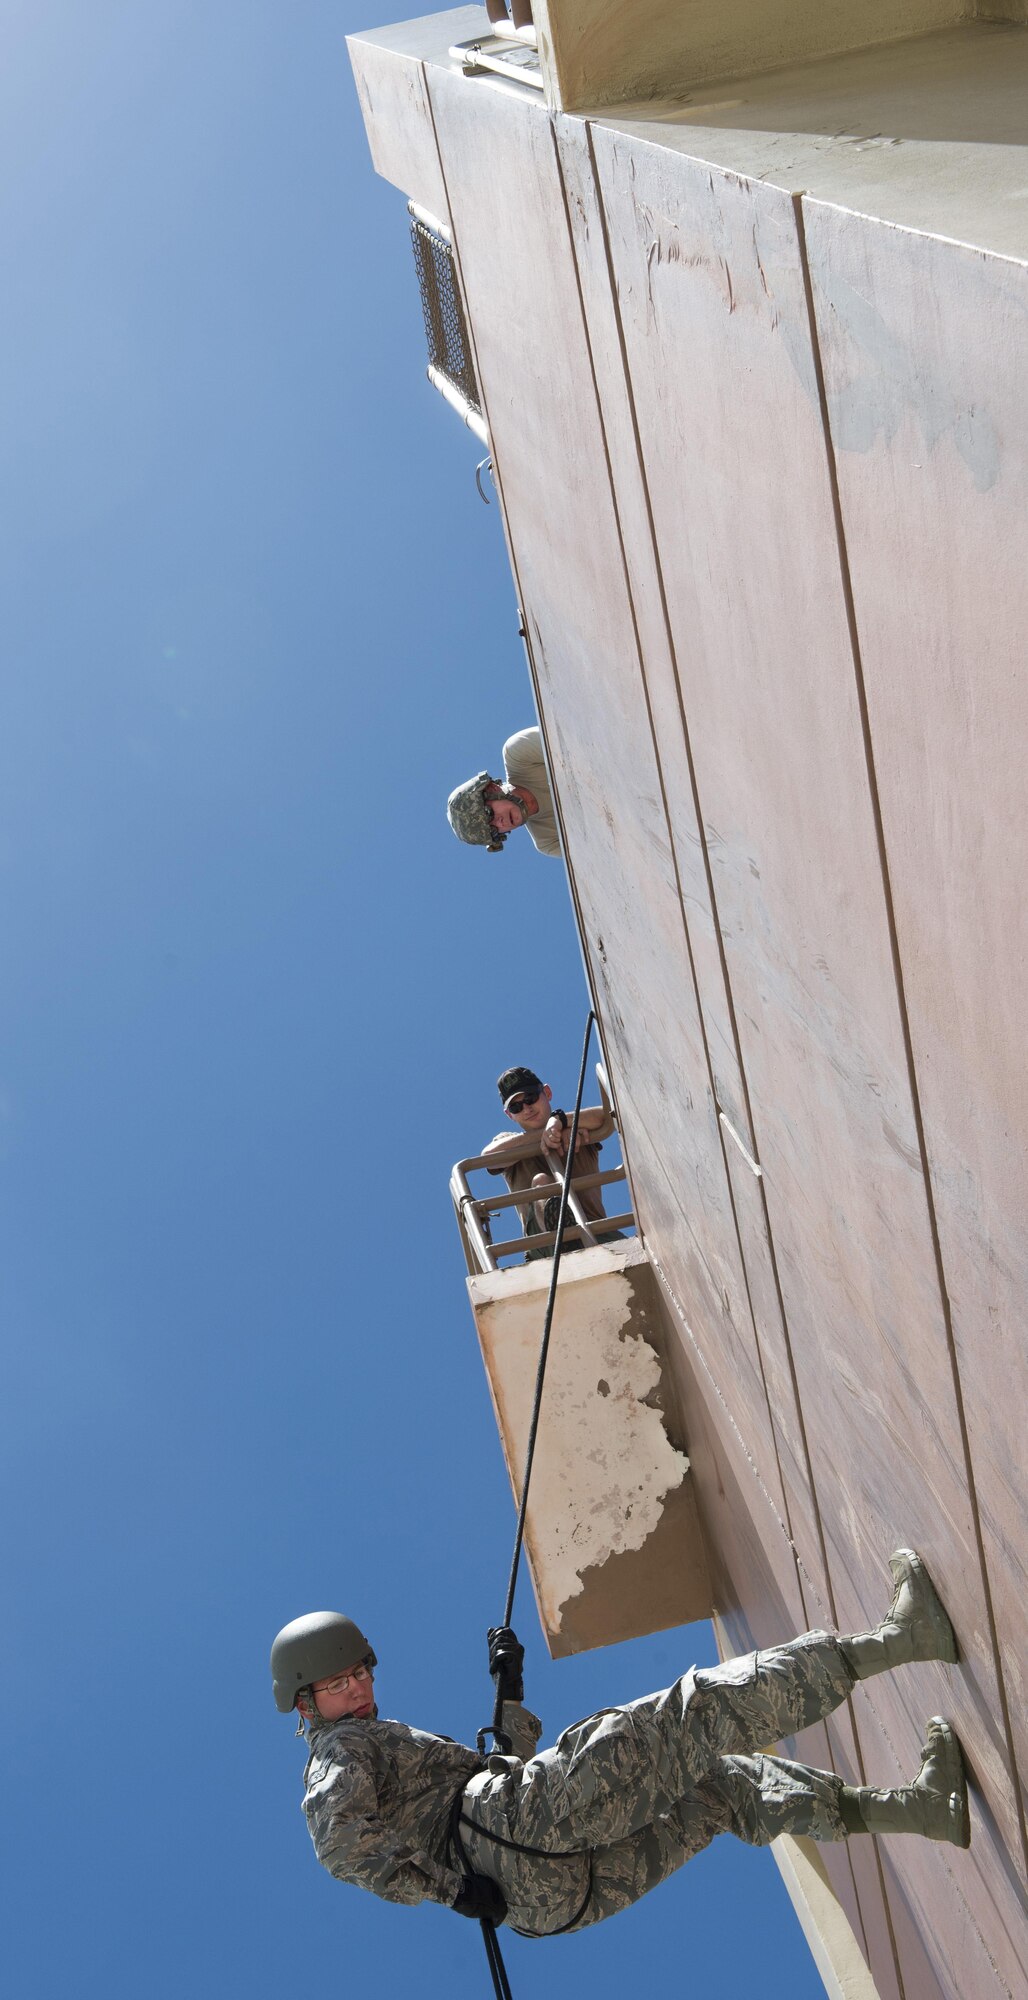 Senior Airman Garrett Hays, 554th RED HORSE Squadron electrical power production, rappels down a 90-foot  tower at Naval Base Guam Aug. 9, 2016. U.S. Navy Petty Officer 1st Class Erickson, parachute rigger and U.S. Air Force Master Sgt. Ronald Weymer, 554th RHS team superintendent/rappel master observed for proper techniques and safety. (U.S. Air Force photo by/Master Sgt. JT May III)